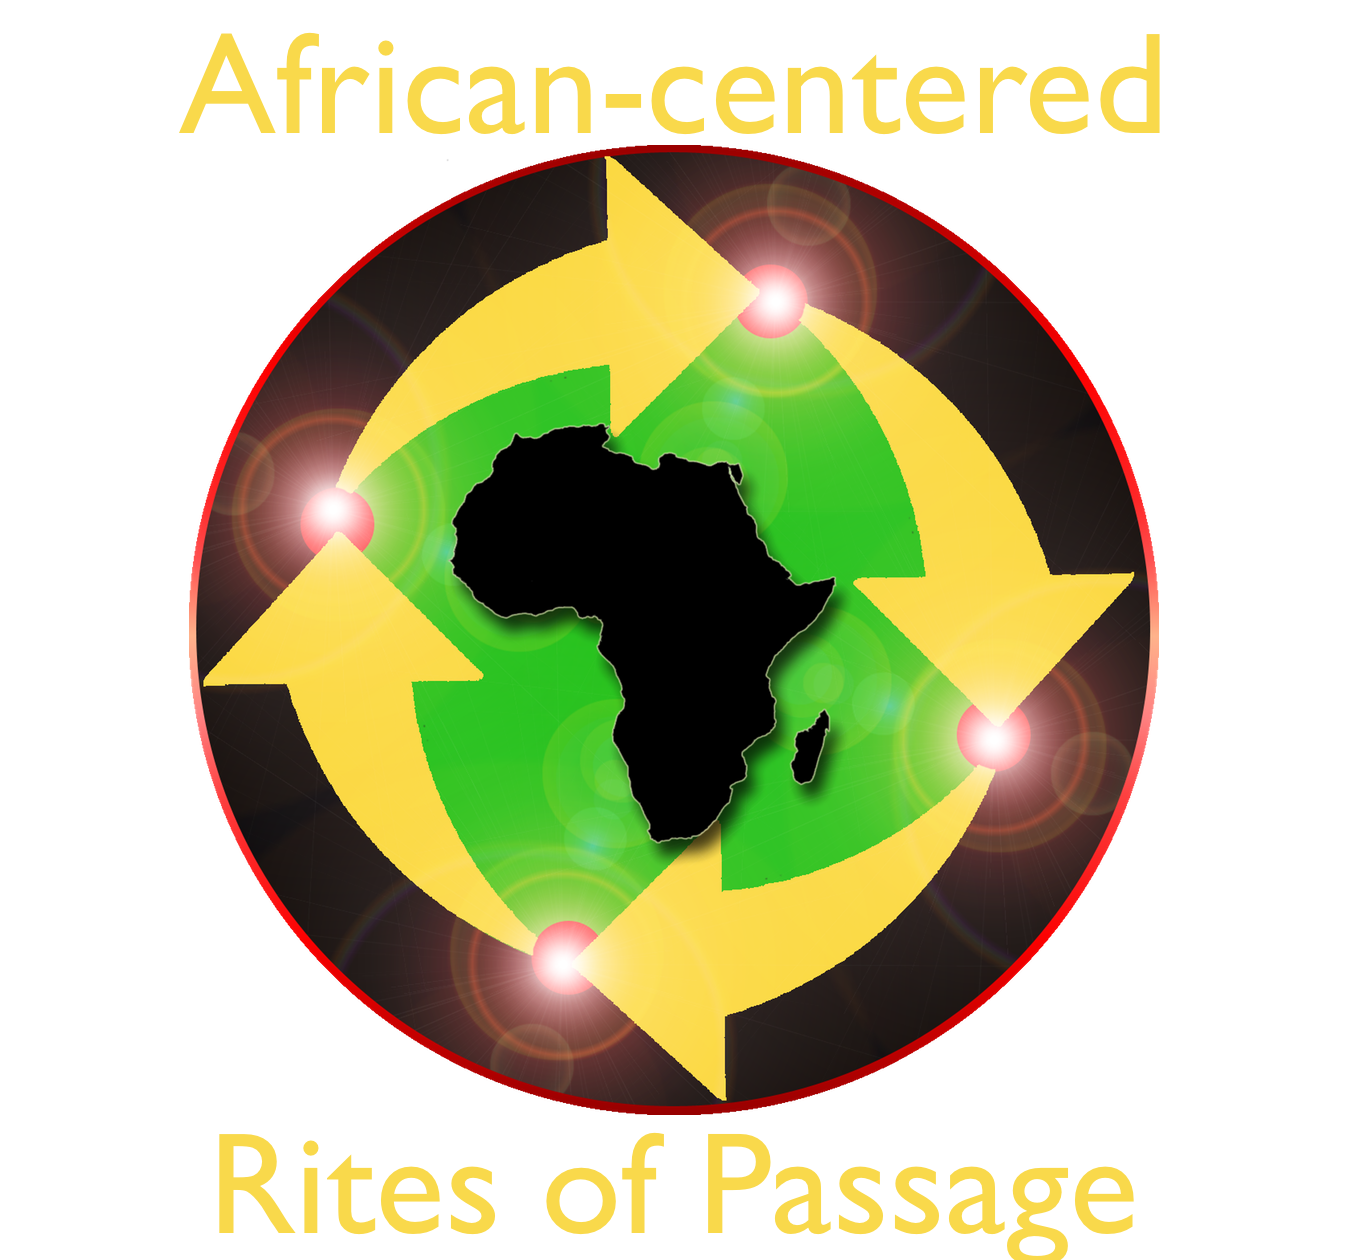 African-centered Rites of Passage